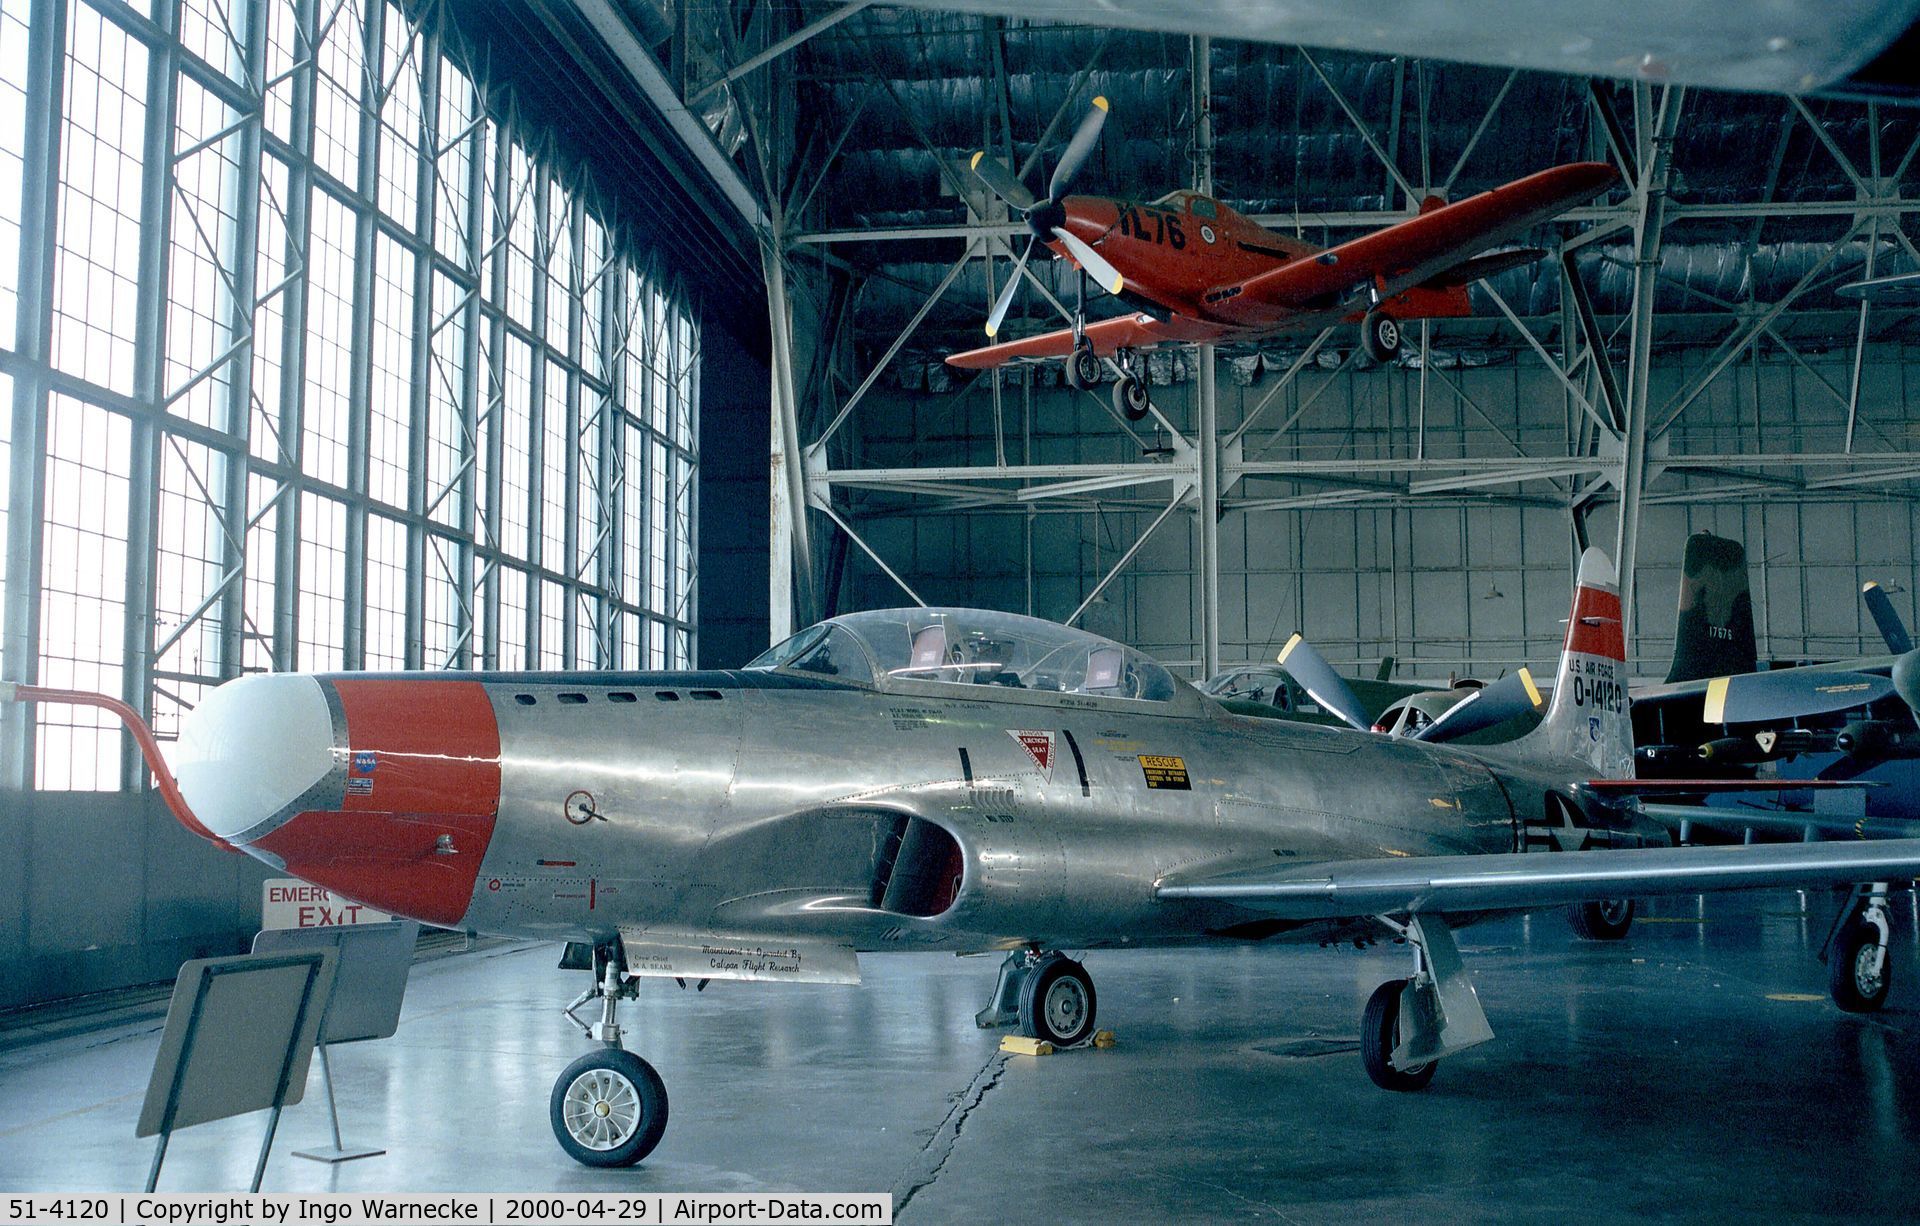 51-4120, 1951 Lockheed NT-33A-1-LO C/N 580-5414, Lockheed NT-33A-1-LO of the USAF at the USAF Museum, Dayton OH